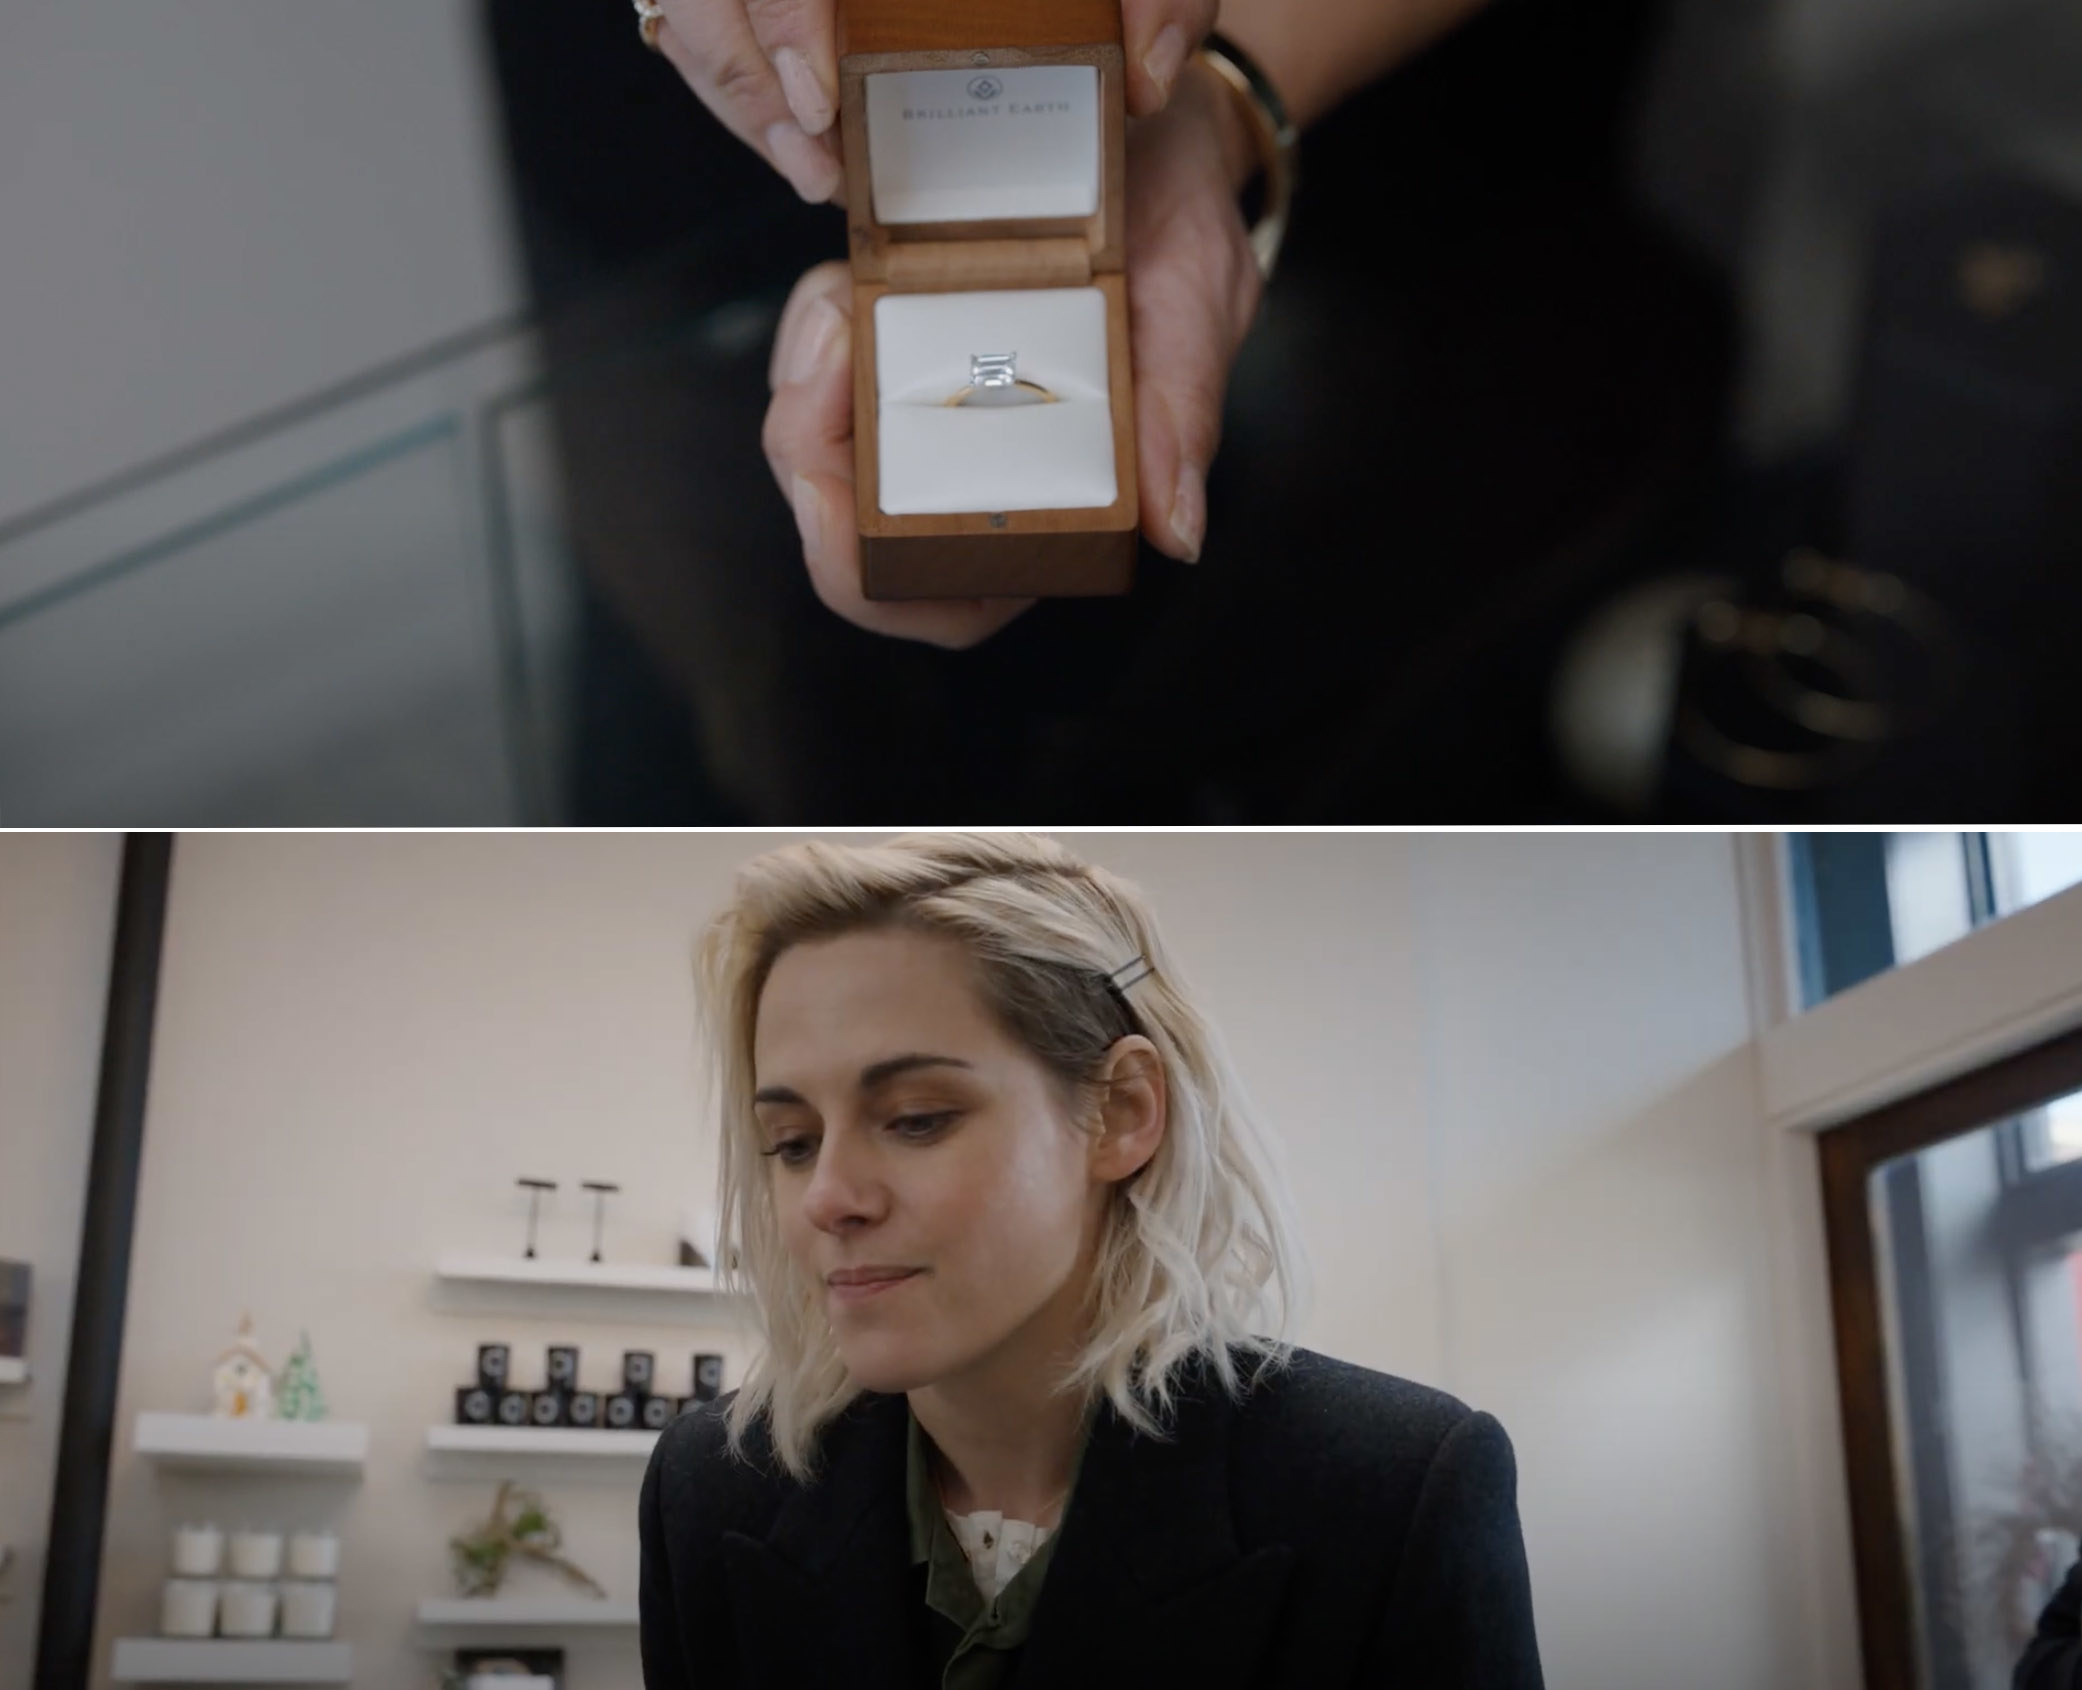 The ring Abby is going to propose with